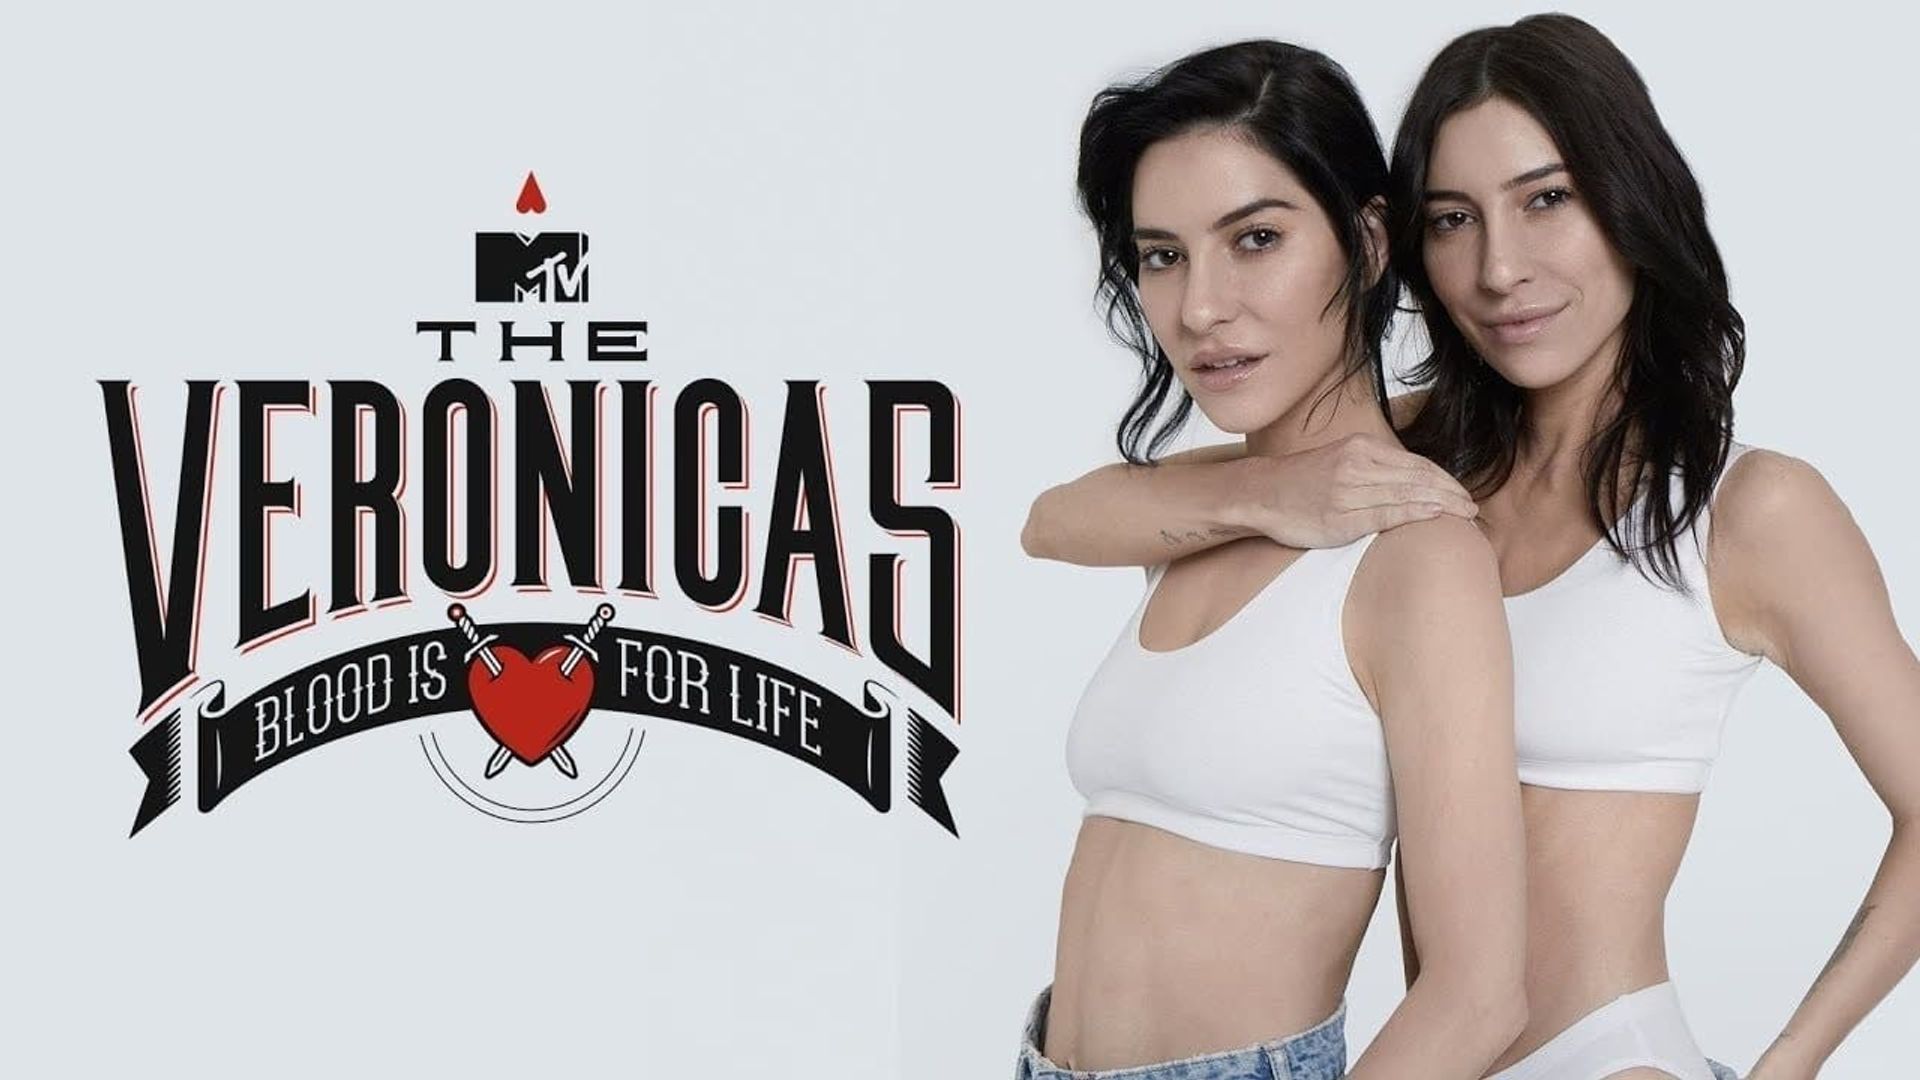 The Veronicas: Blood Is for Life background